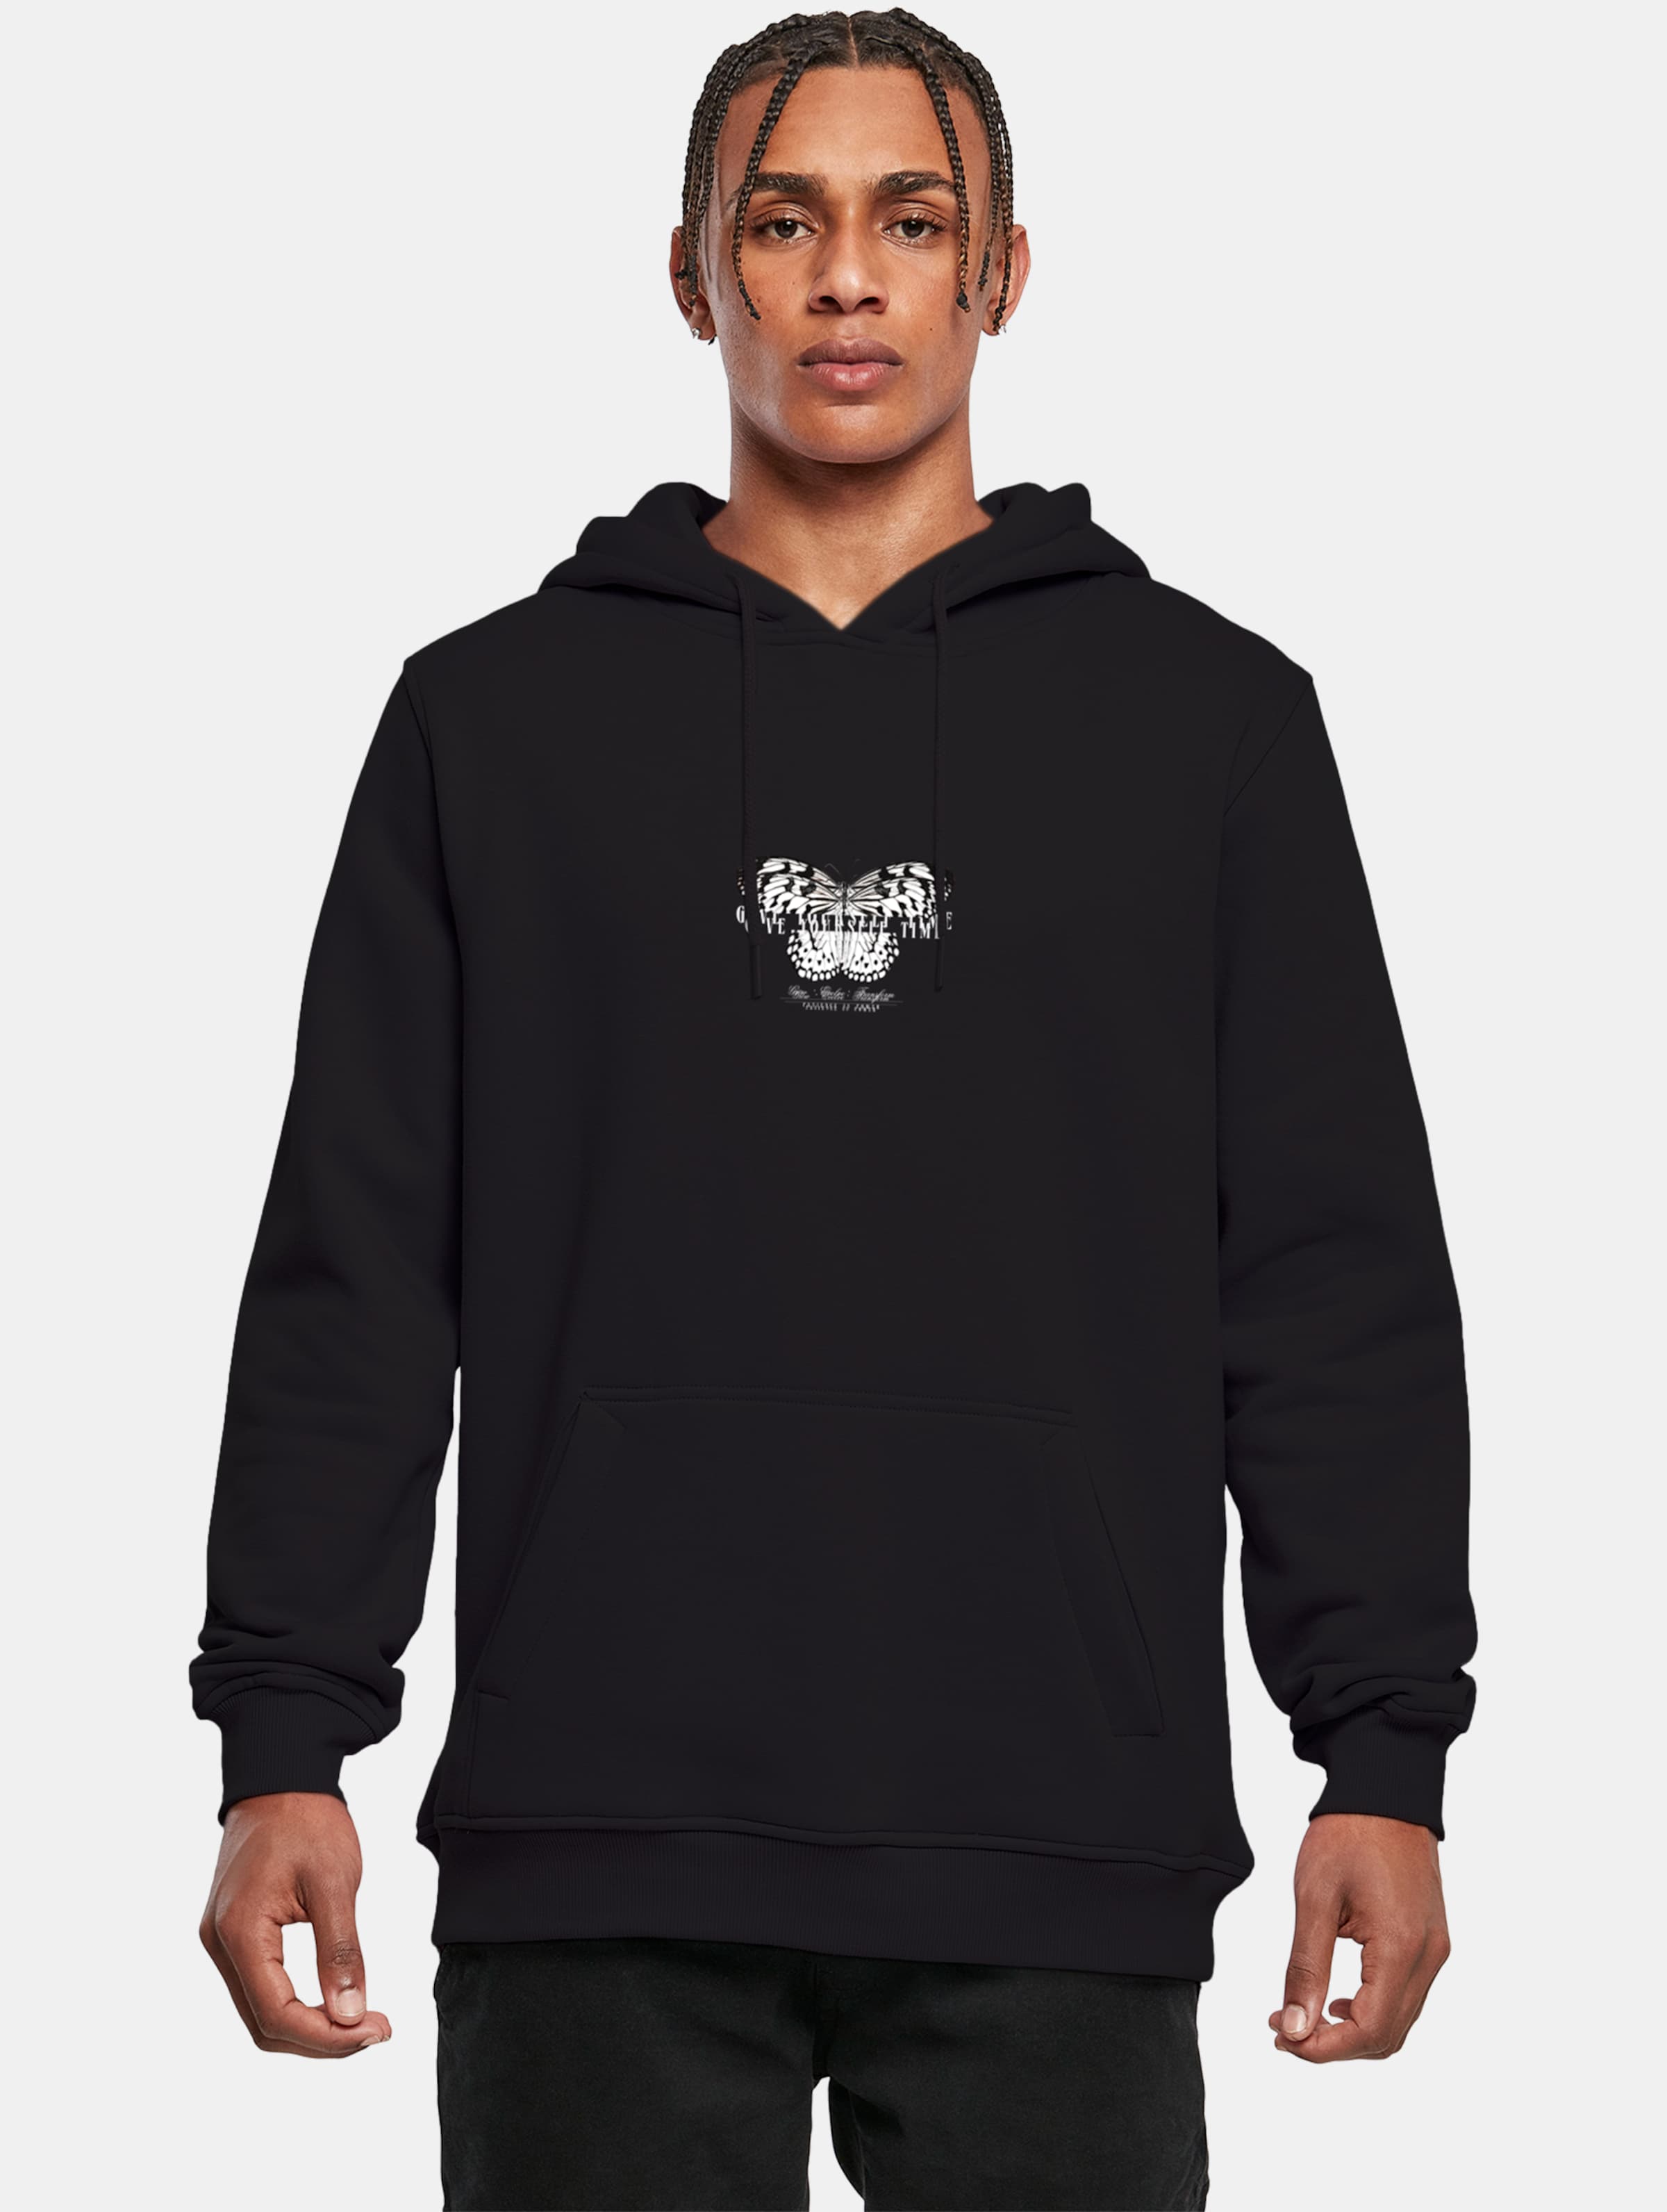 Mister Tee - Give Yourself Time Hoodie/trui - 3XL - Zwart